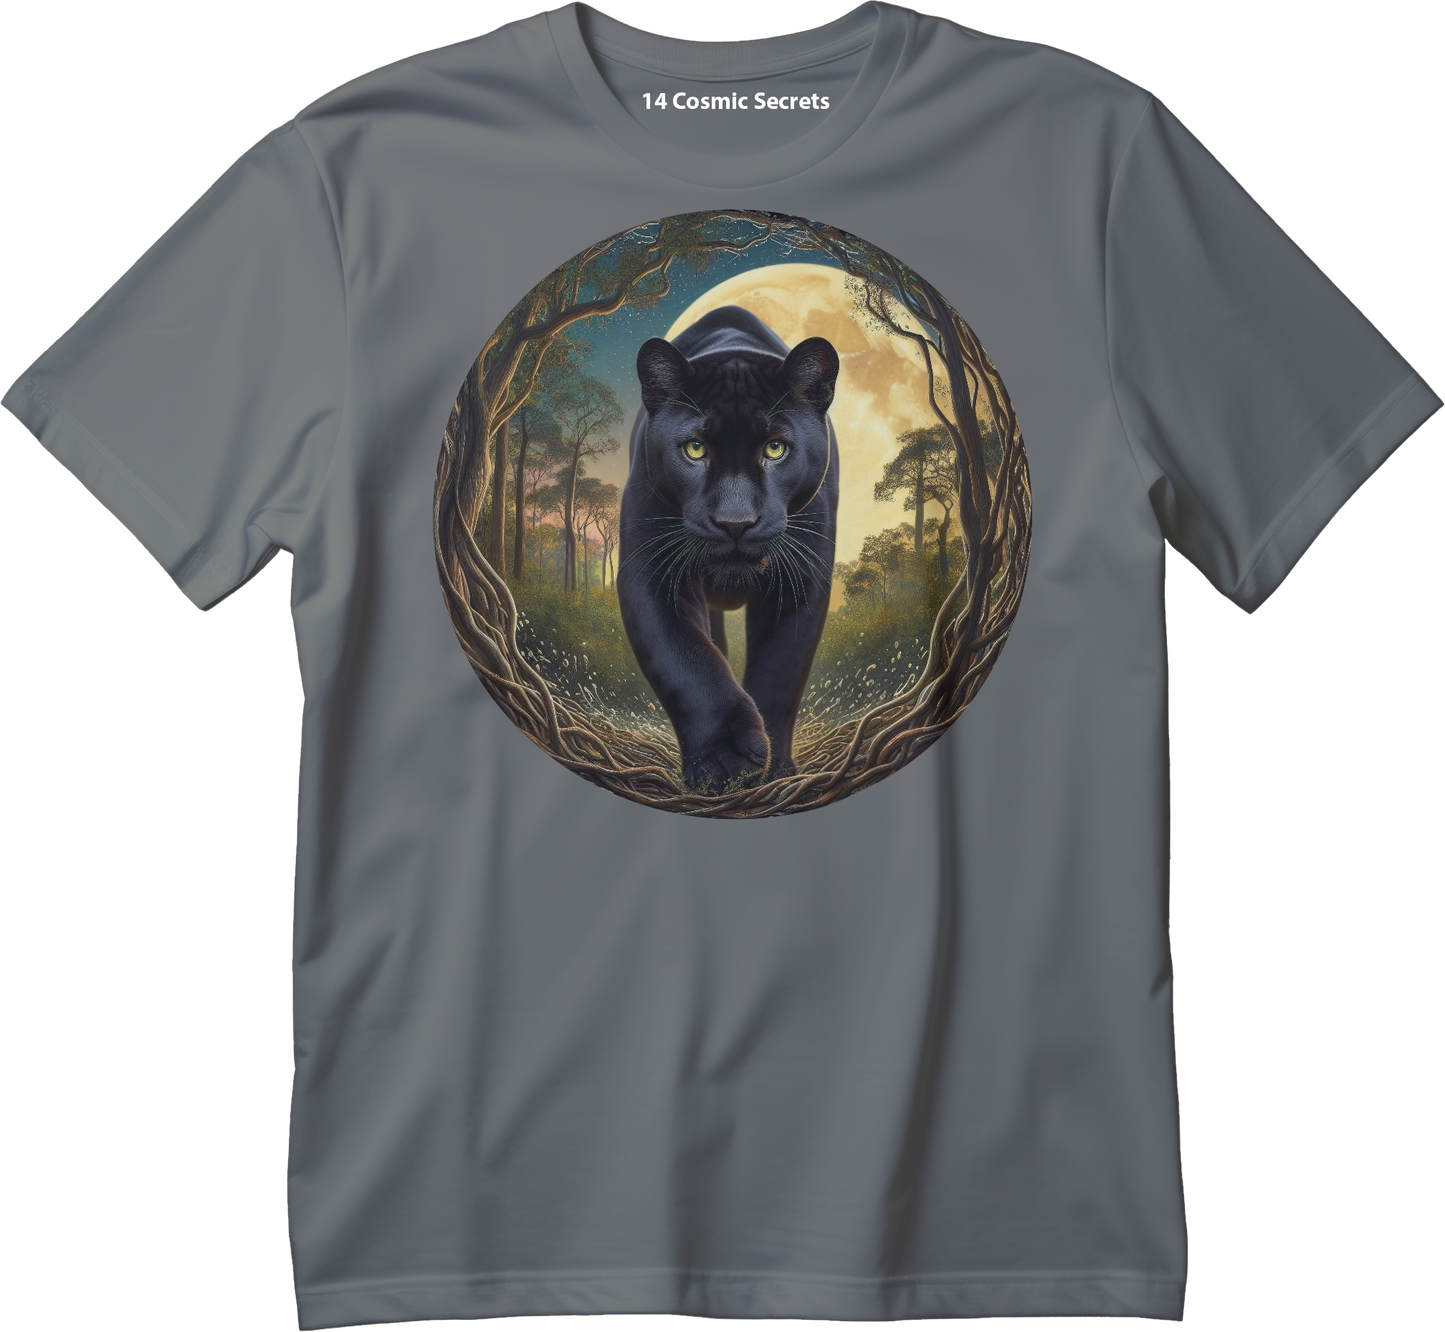 Black Panther on a Moon Night Graphic T-Shirt  Cotton T-Shirt Magnificence of India T-Shirt